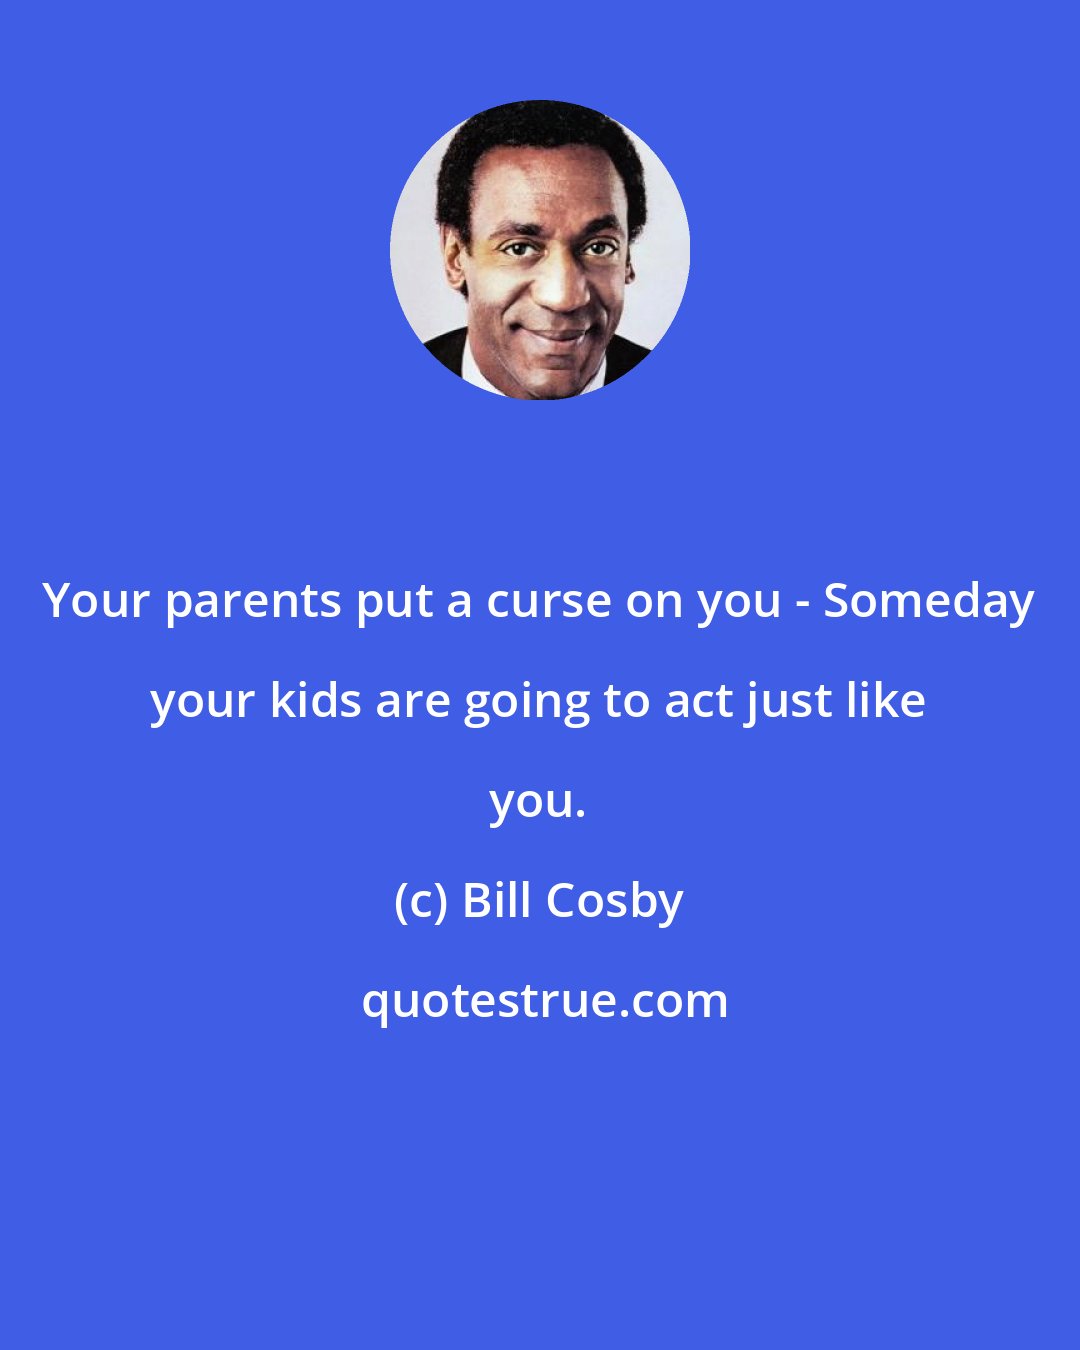 Bill Cosby: Your parents put a curse on you - Someday your kids are going to act just like you.